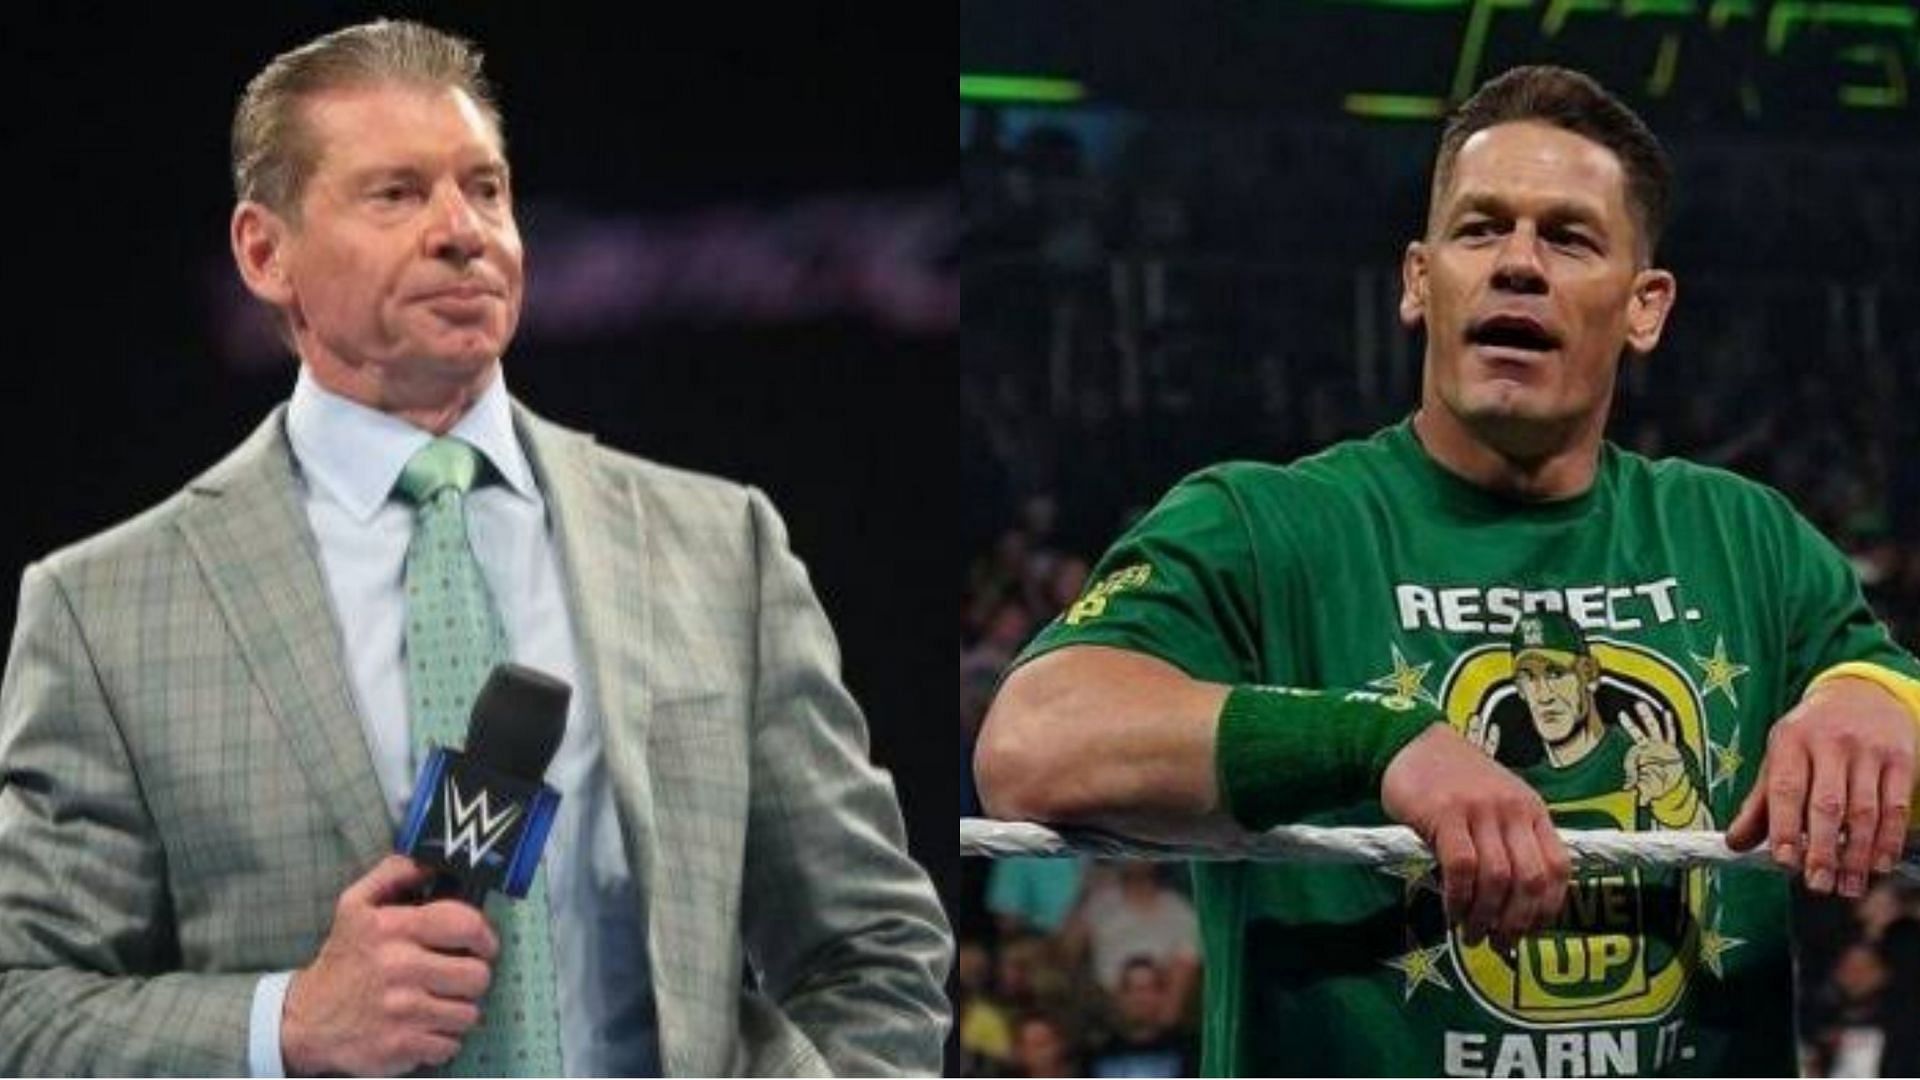 Vince McMahon made John Cena the face of the WWE